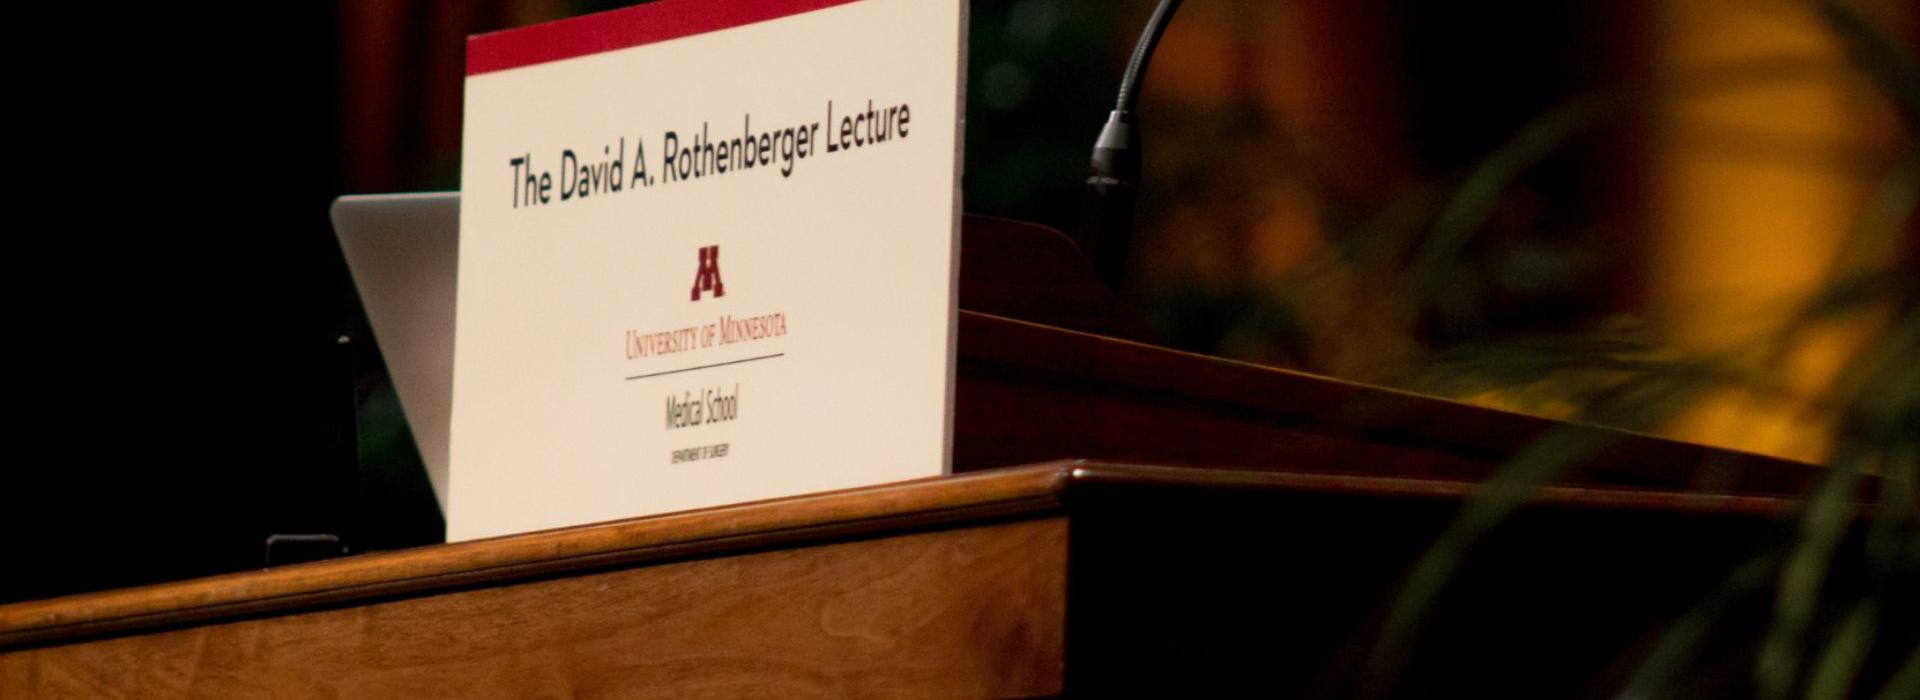 Rothenberger Lecture